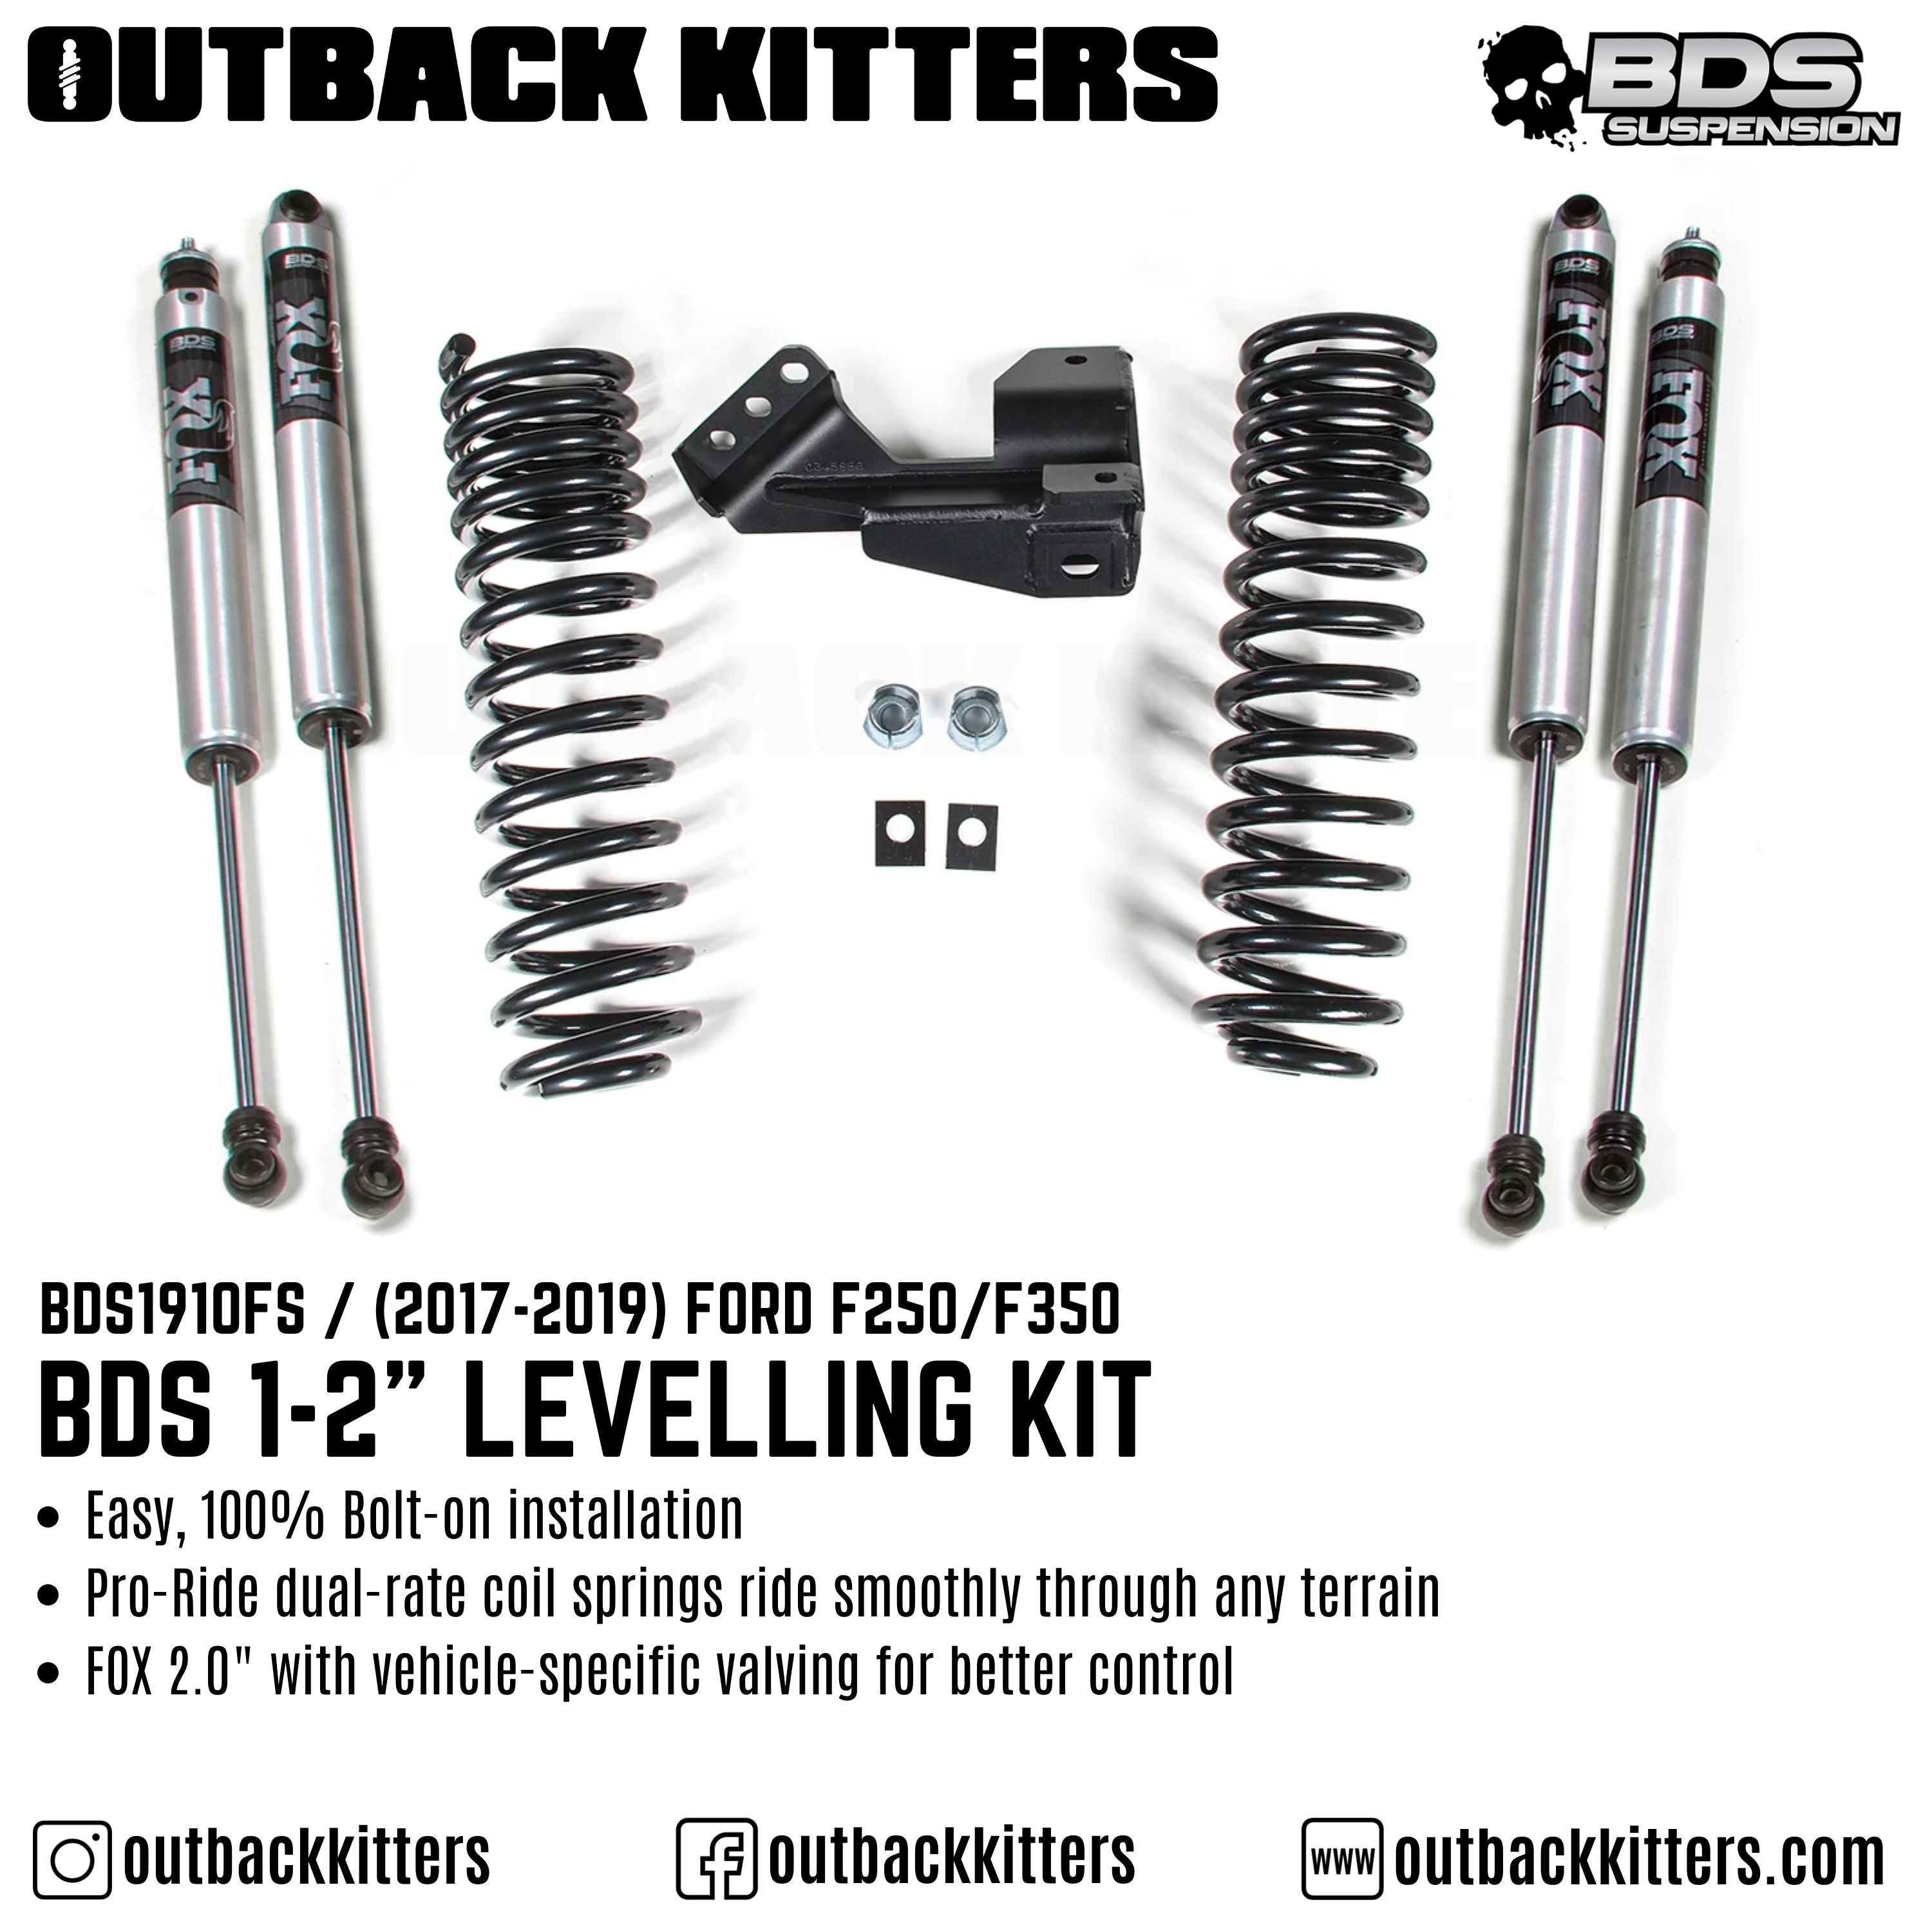 1-2" Leveling Kit for Ford F250/350 (2017-2019) - Outback Kitters